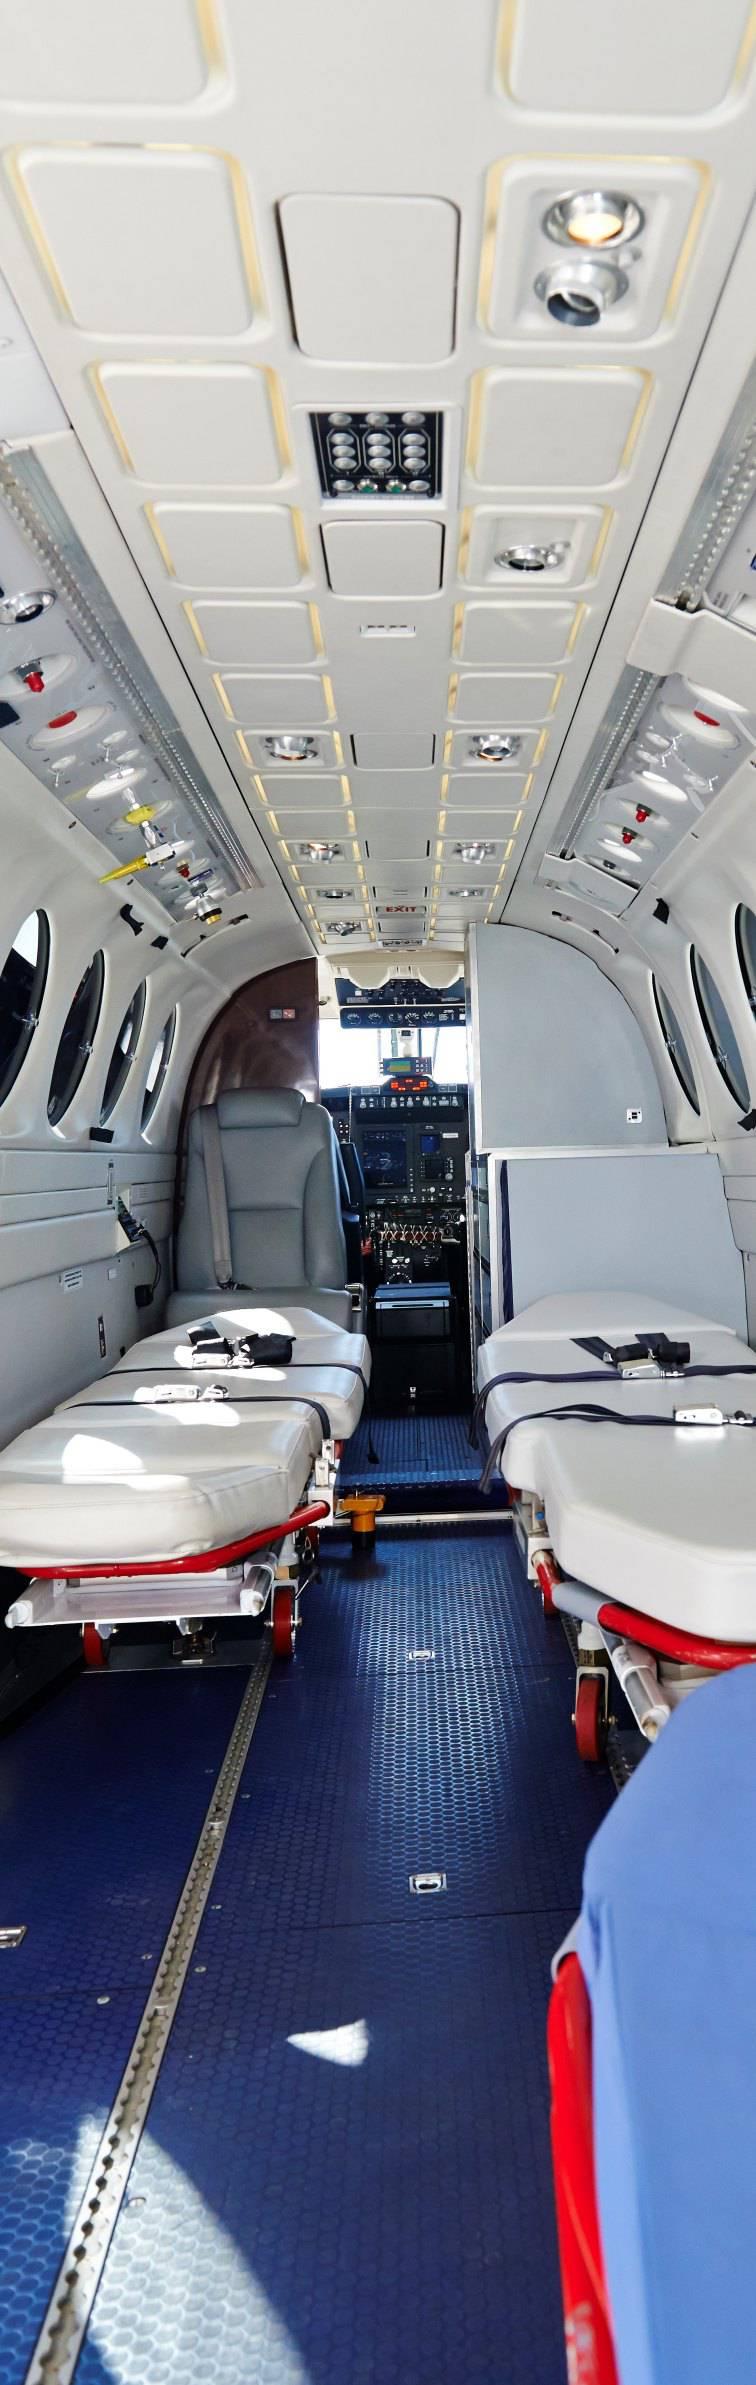 Aeromedical Solutions 5 Innovative solutions that exceed customer expectations Hawker Pacific has been tailoring aeromedical solutions to government and civil aeromedical/ems providers throughout